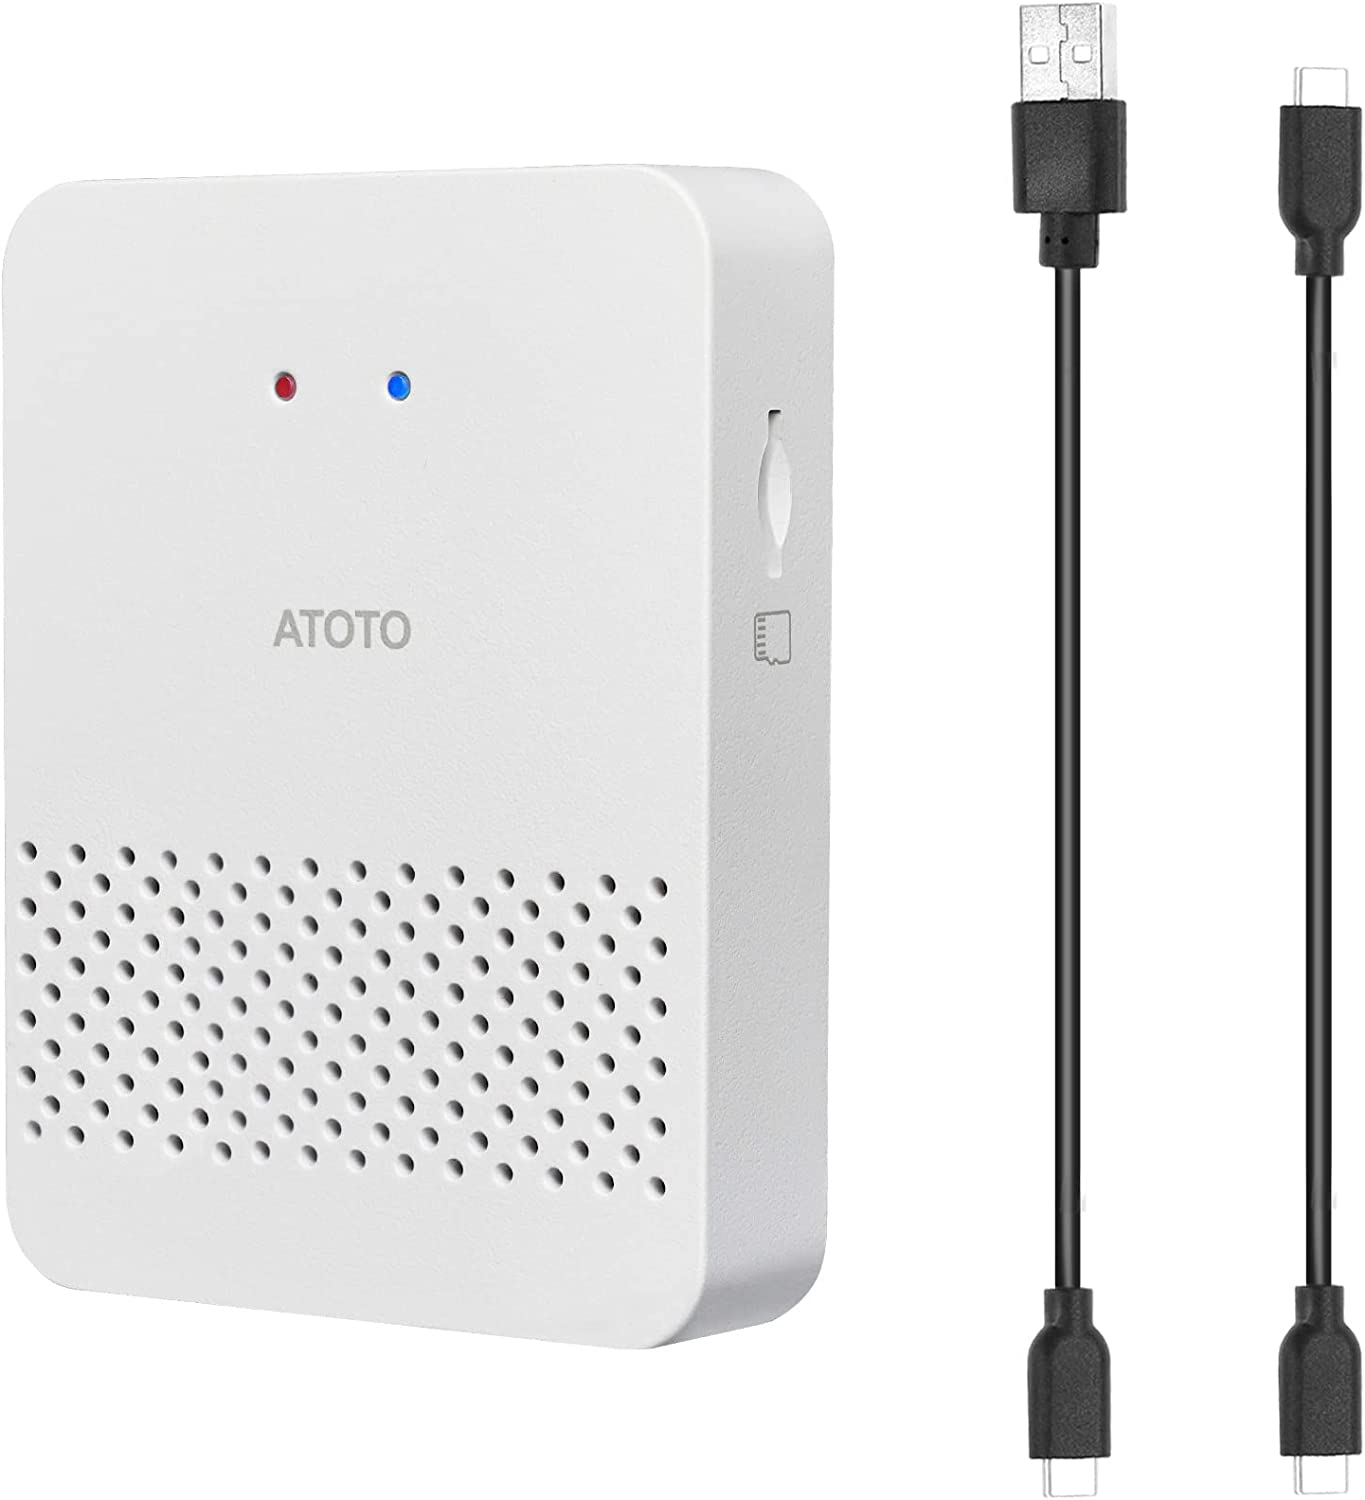 Amazon.com: [2022 New] ATOTO AD3AA-A Wireless Android Auto Adapter, Convert Wired to Wireless for Factory Wired Android Auto 5G WiFi, Plug & Play $44.50